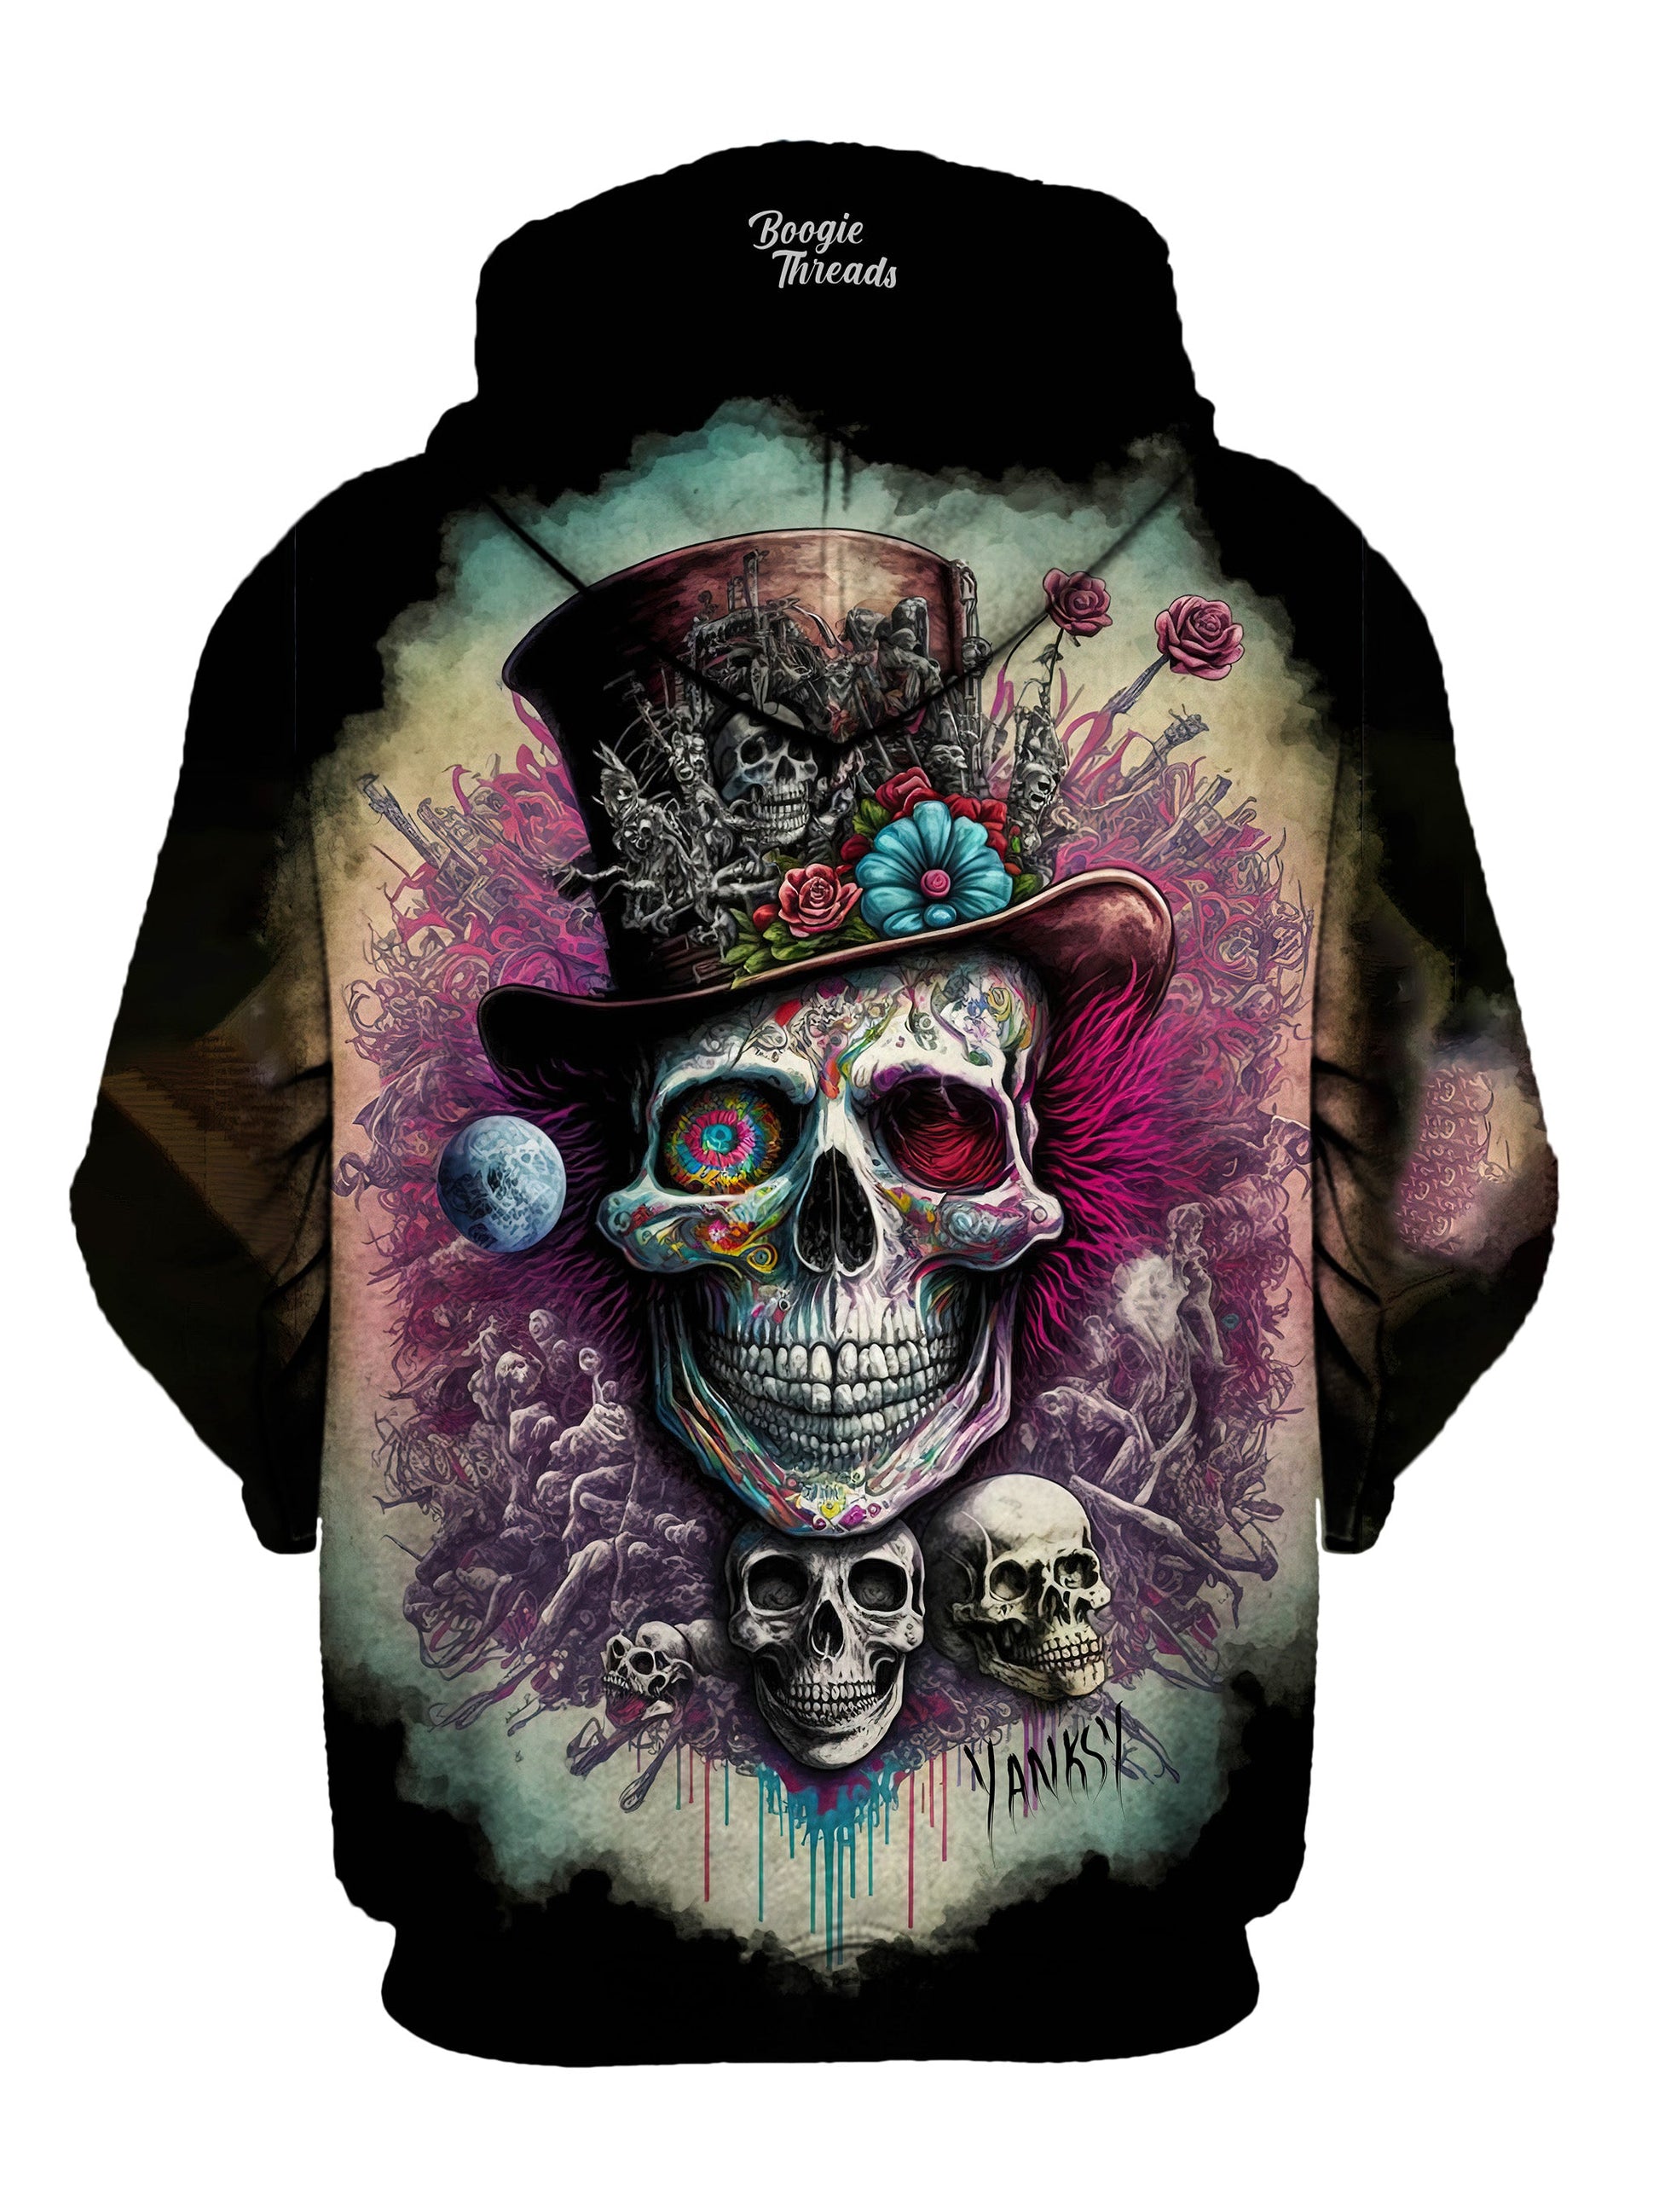 Colorful and trippy hoodie perfect for expressing your unique style